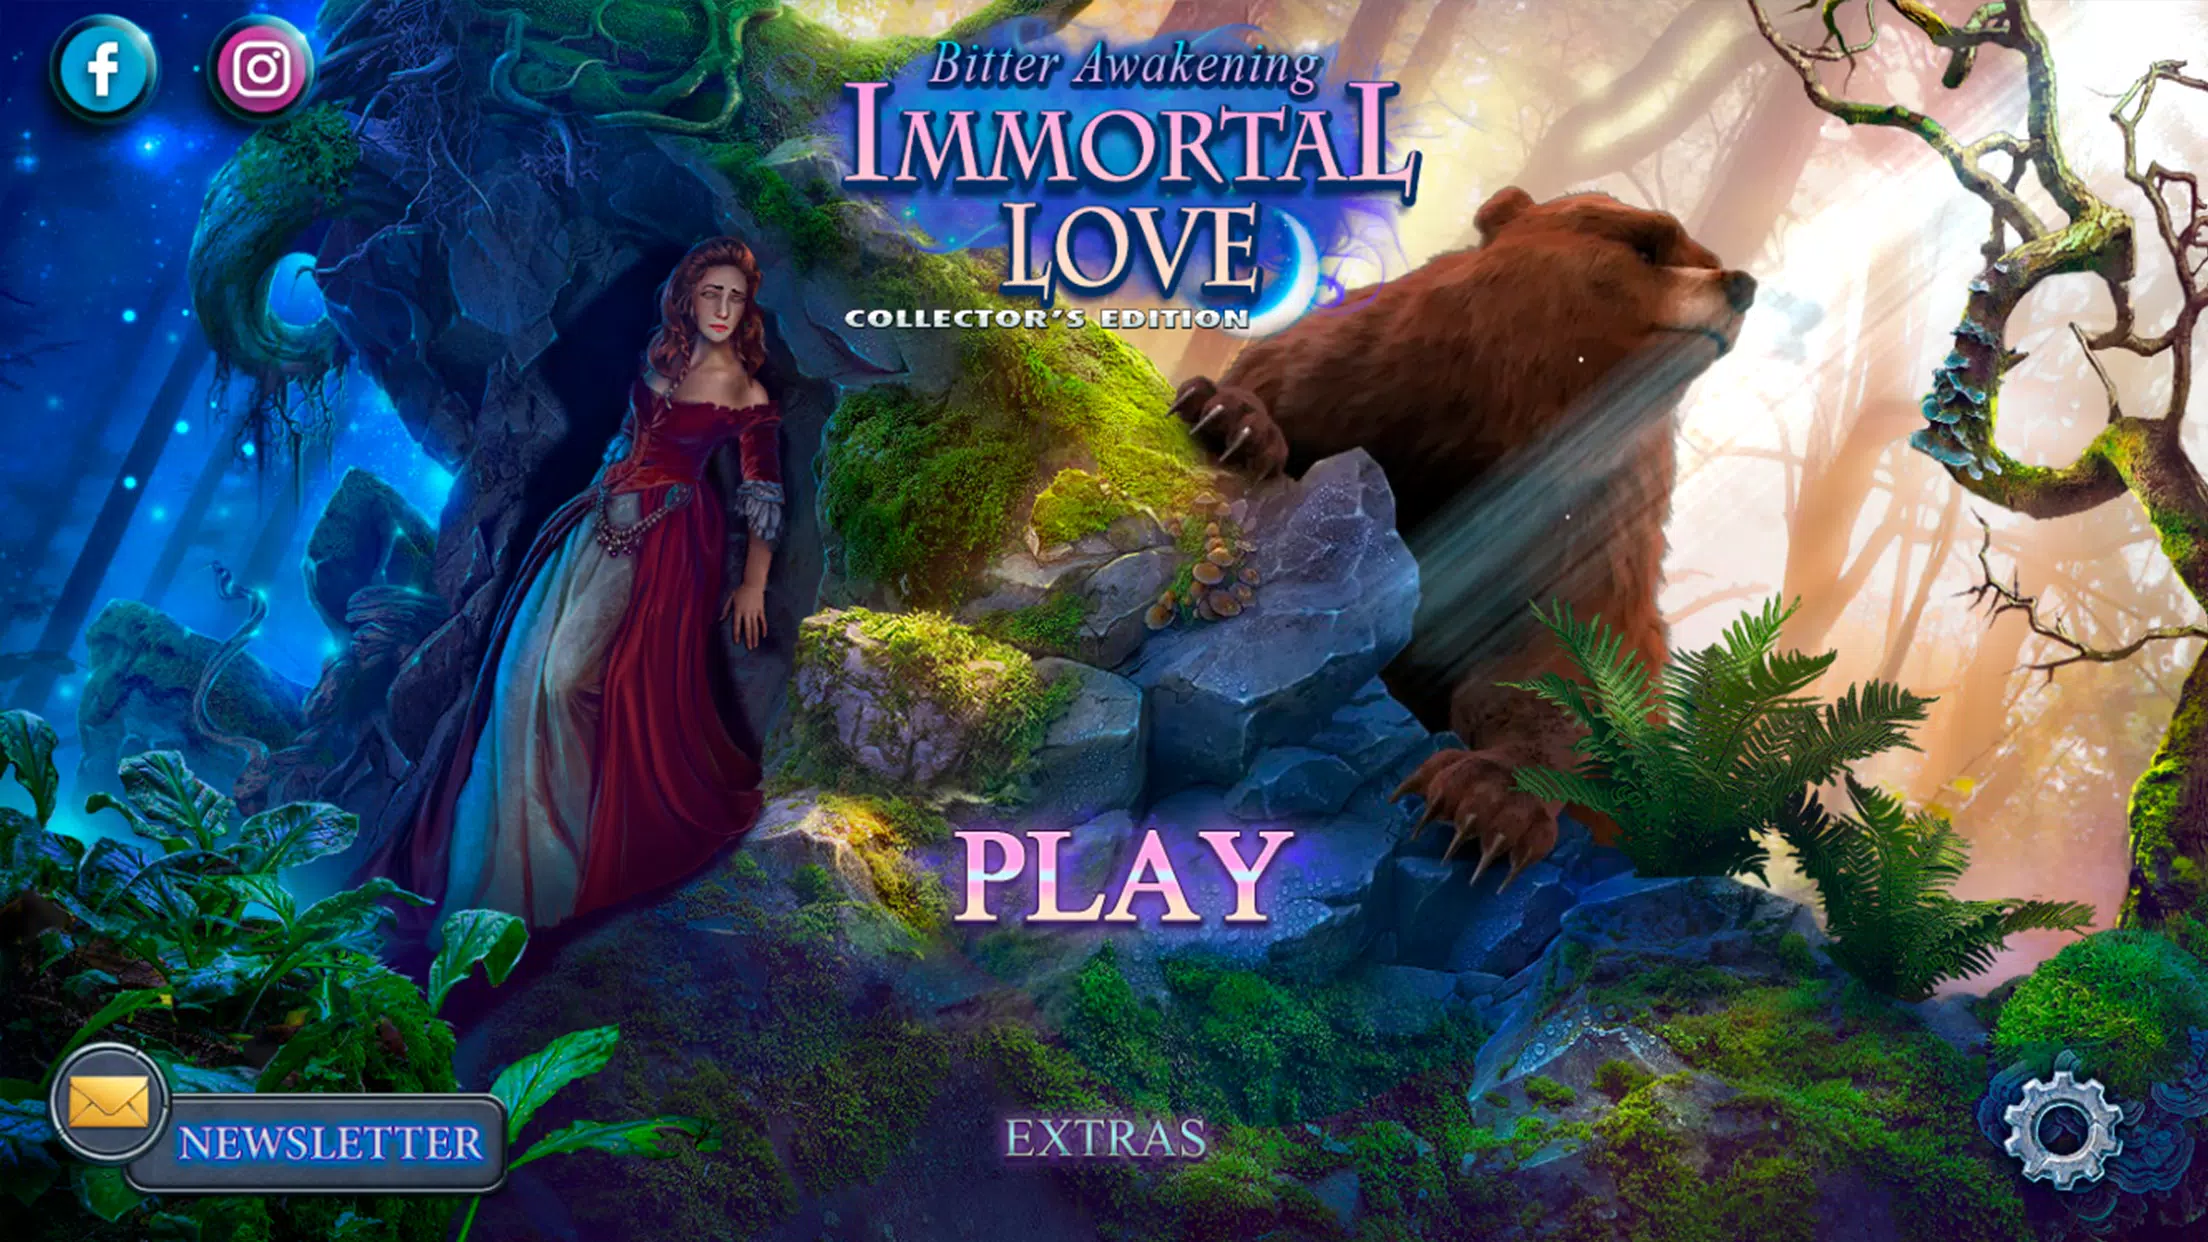 Immortal Love: Blind Desire Game for Android - Download